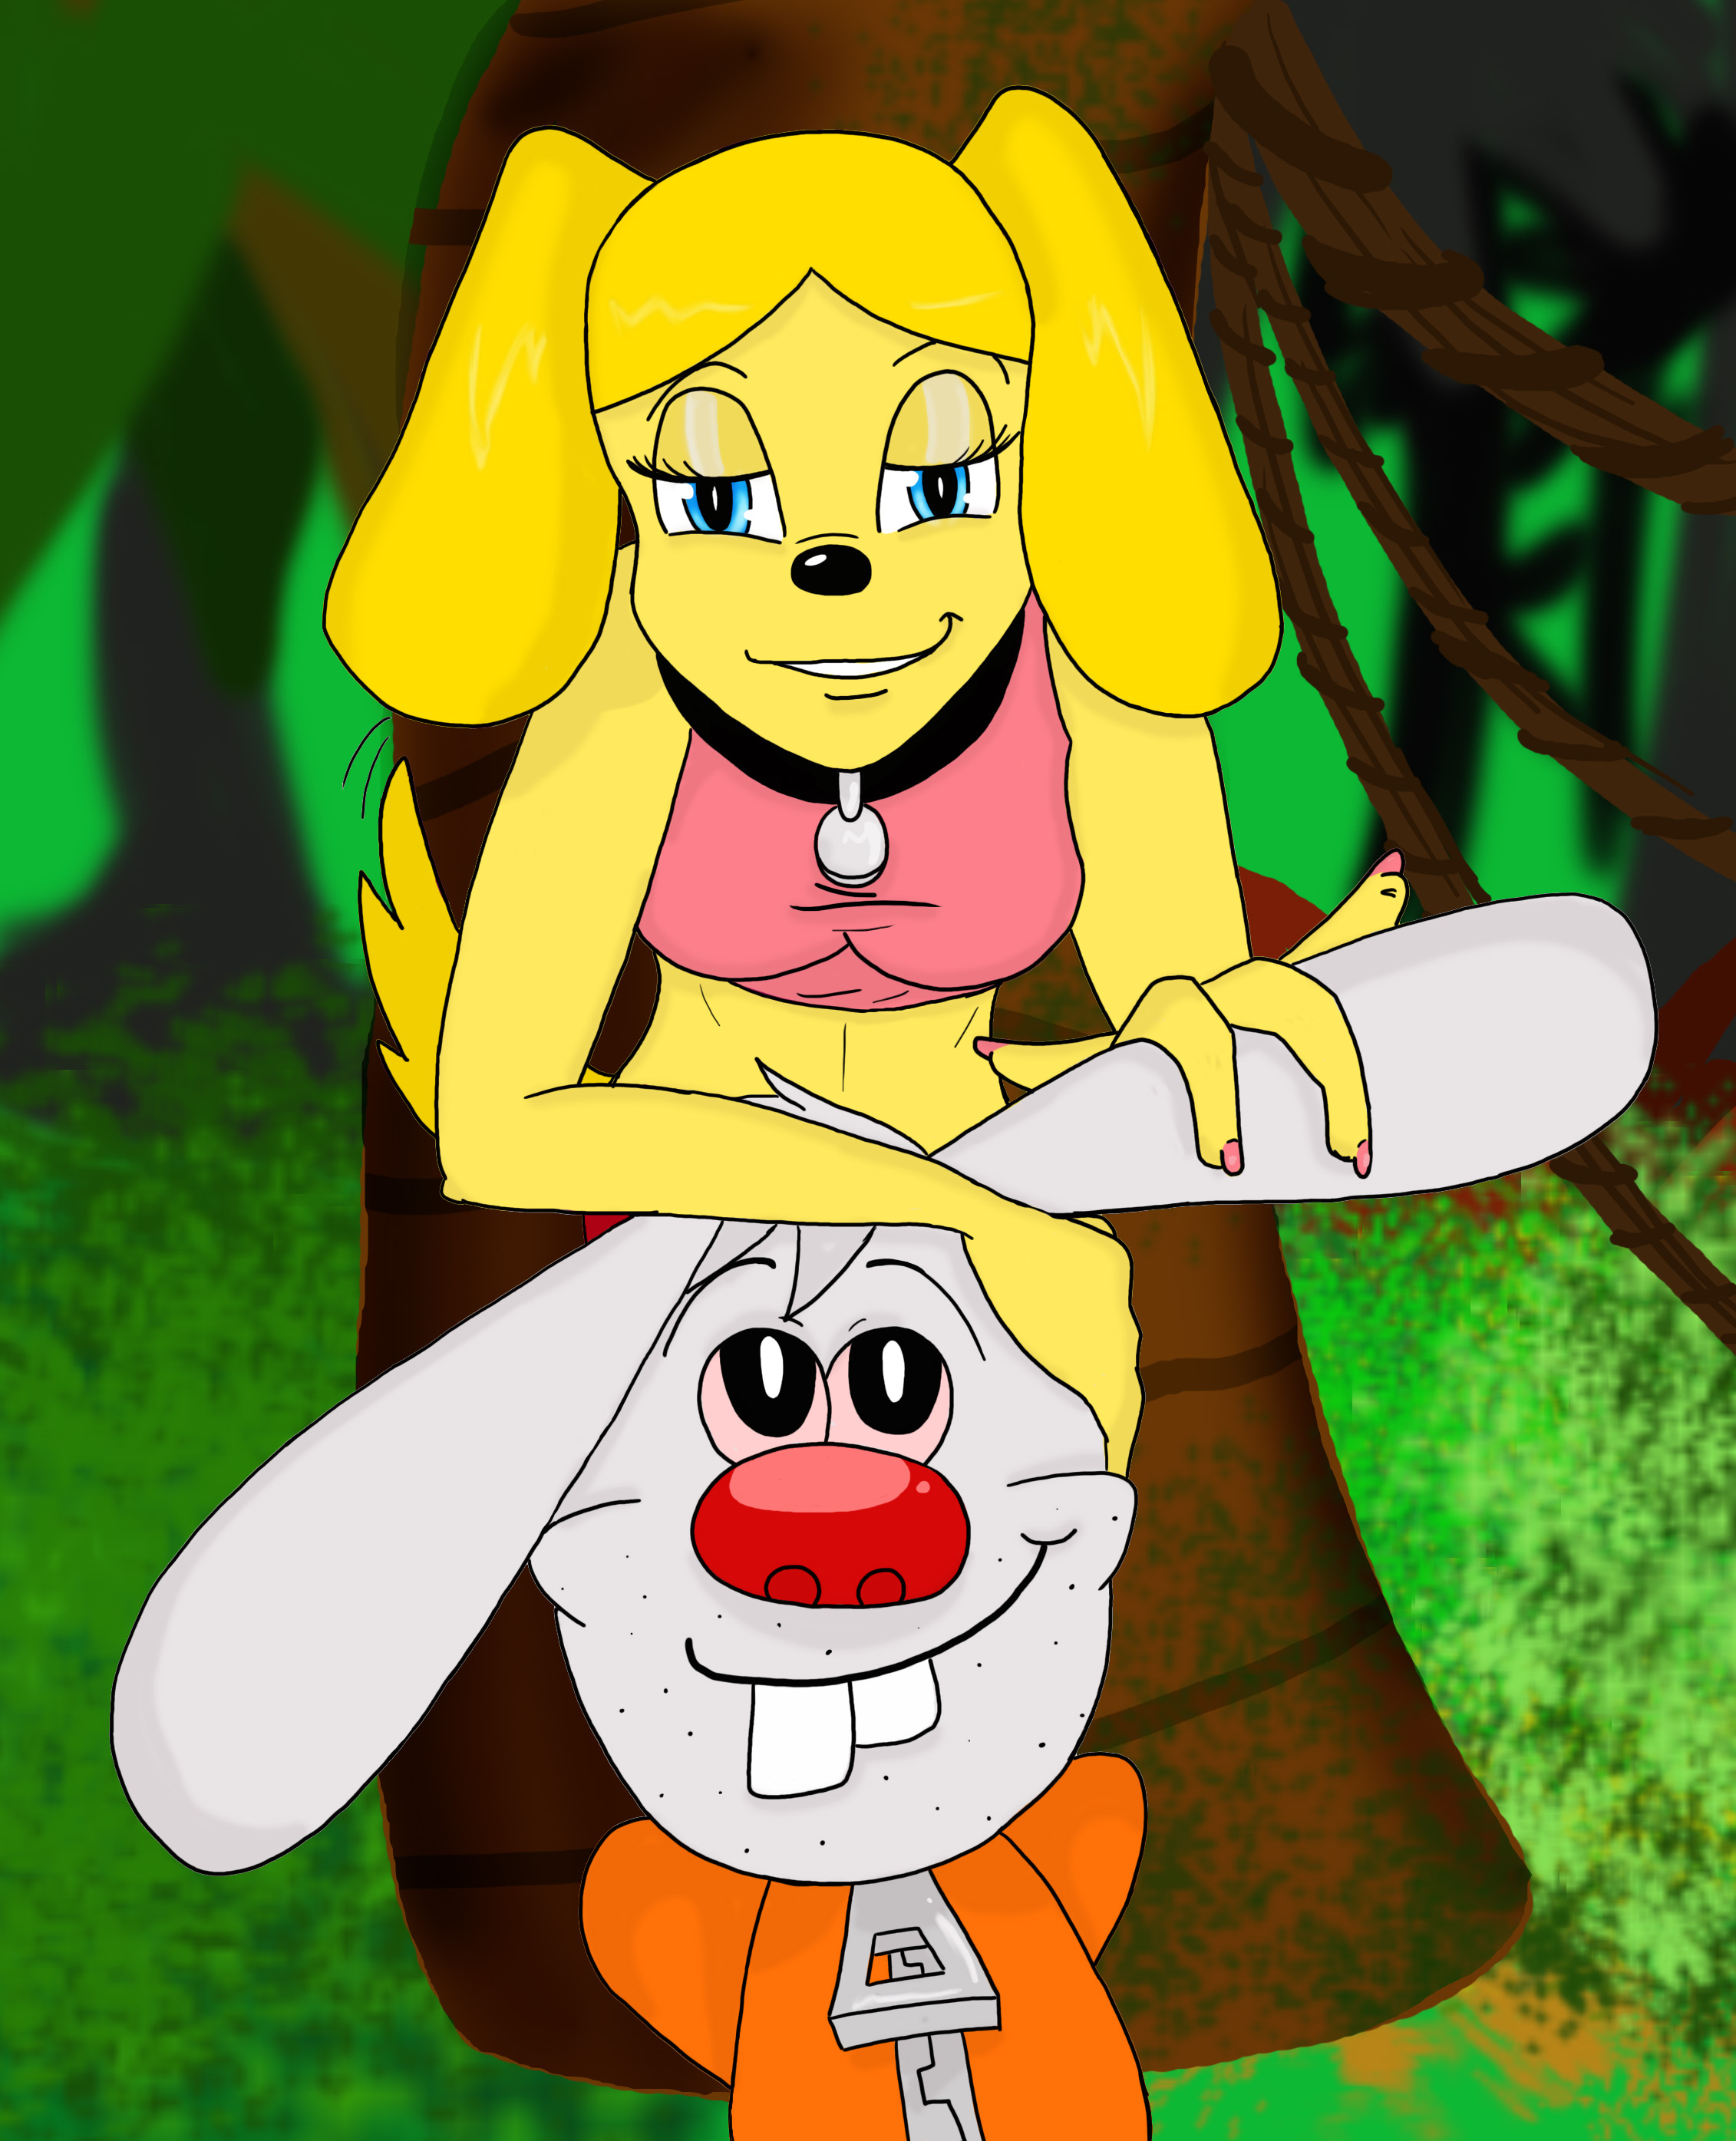 And Mr Whiskerxxx, Meet Brandy and Mr Whiskers, Brandy Mr Whisk...